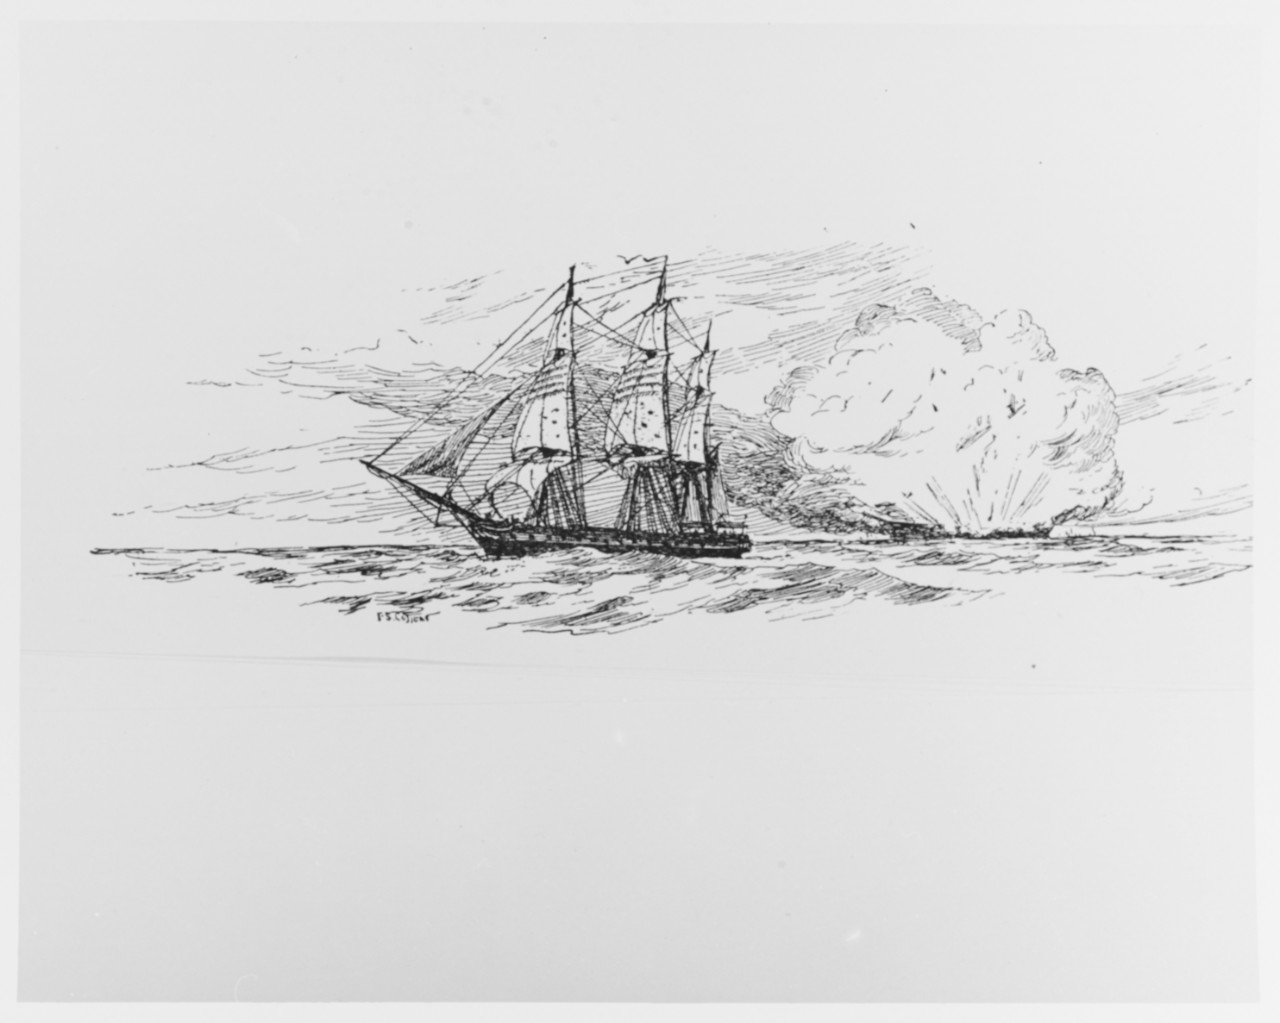 Photo #: NH 74532  Action between USS Constitution and HMS Guerriere, 19 August 1812